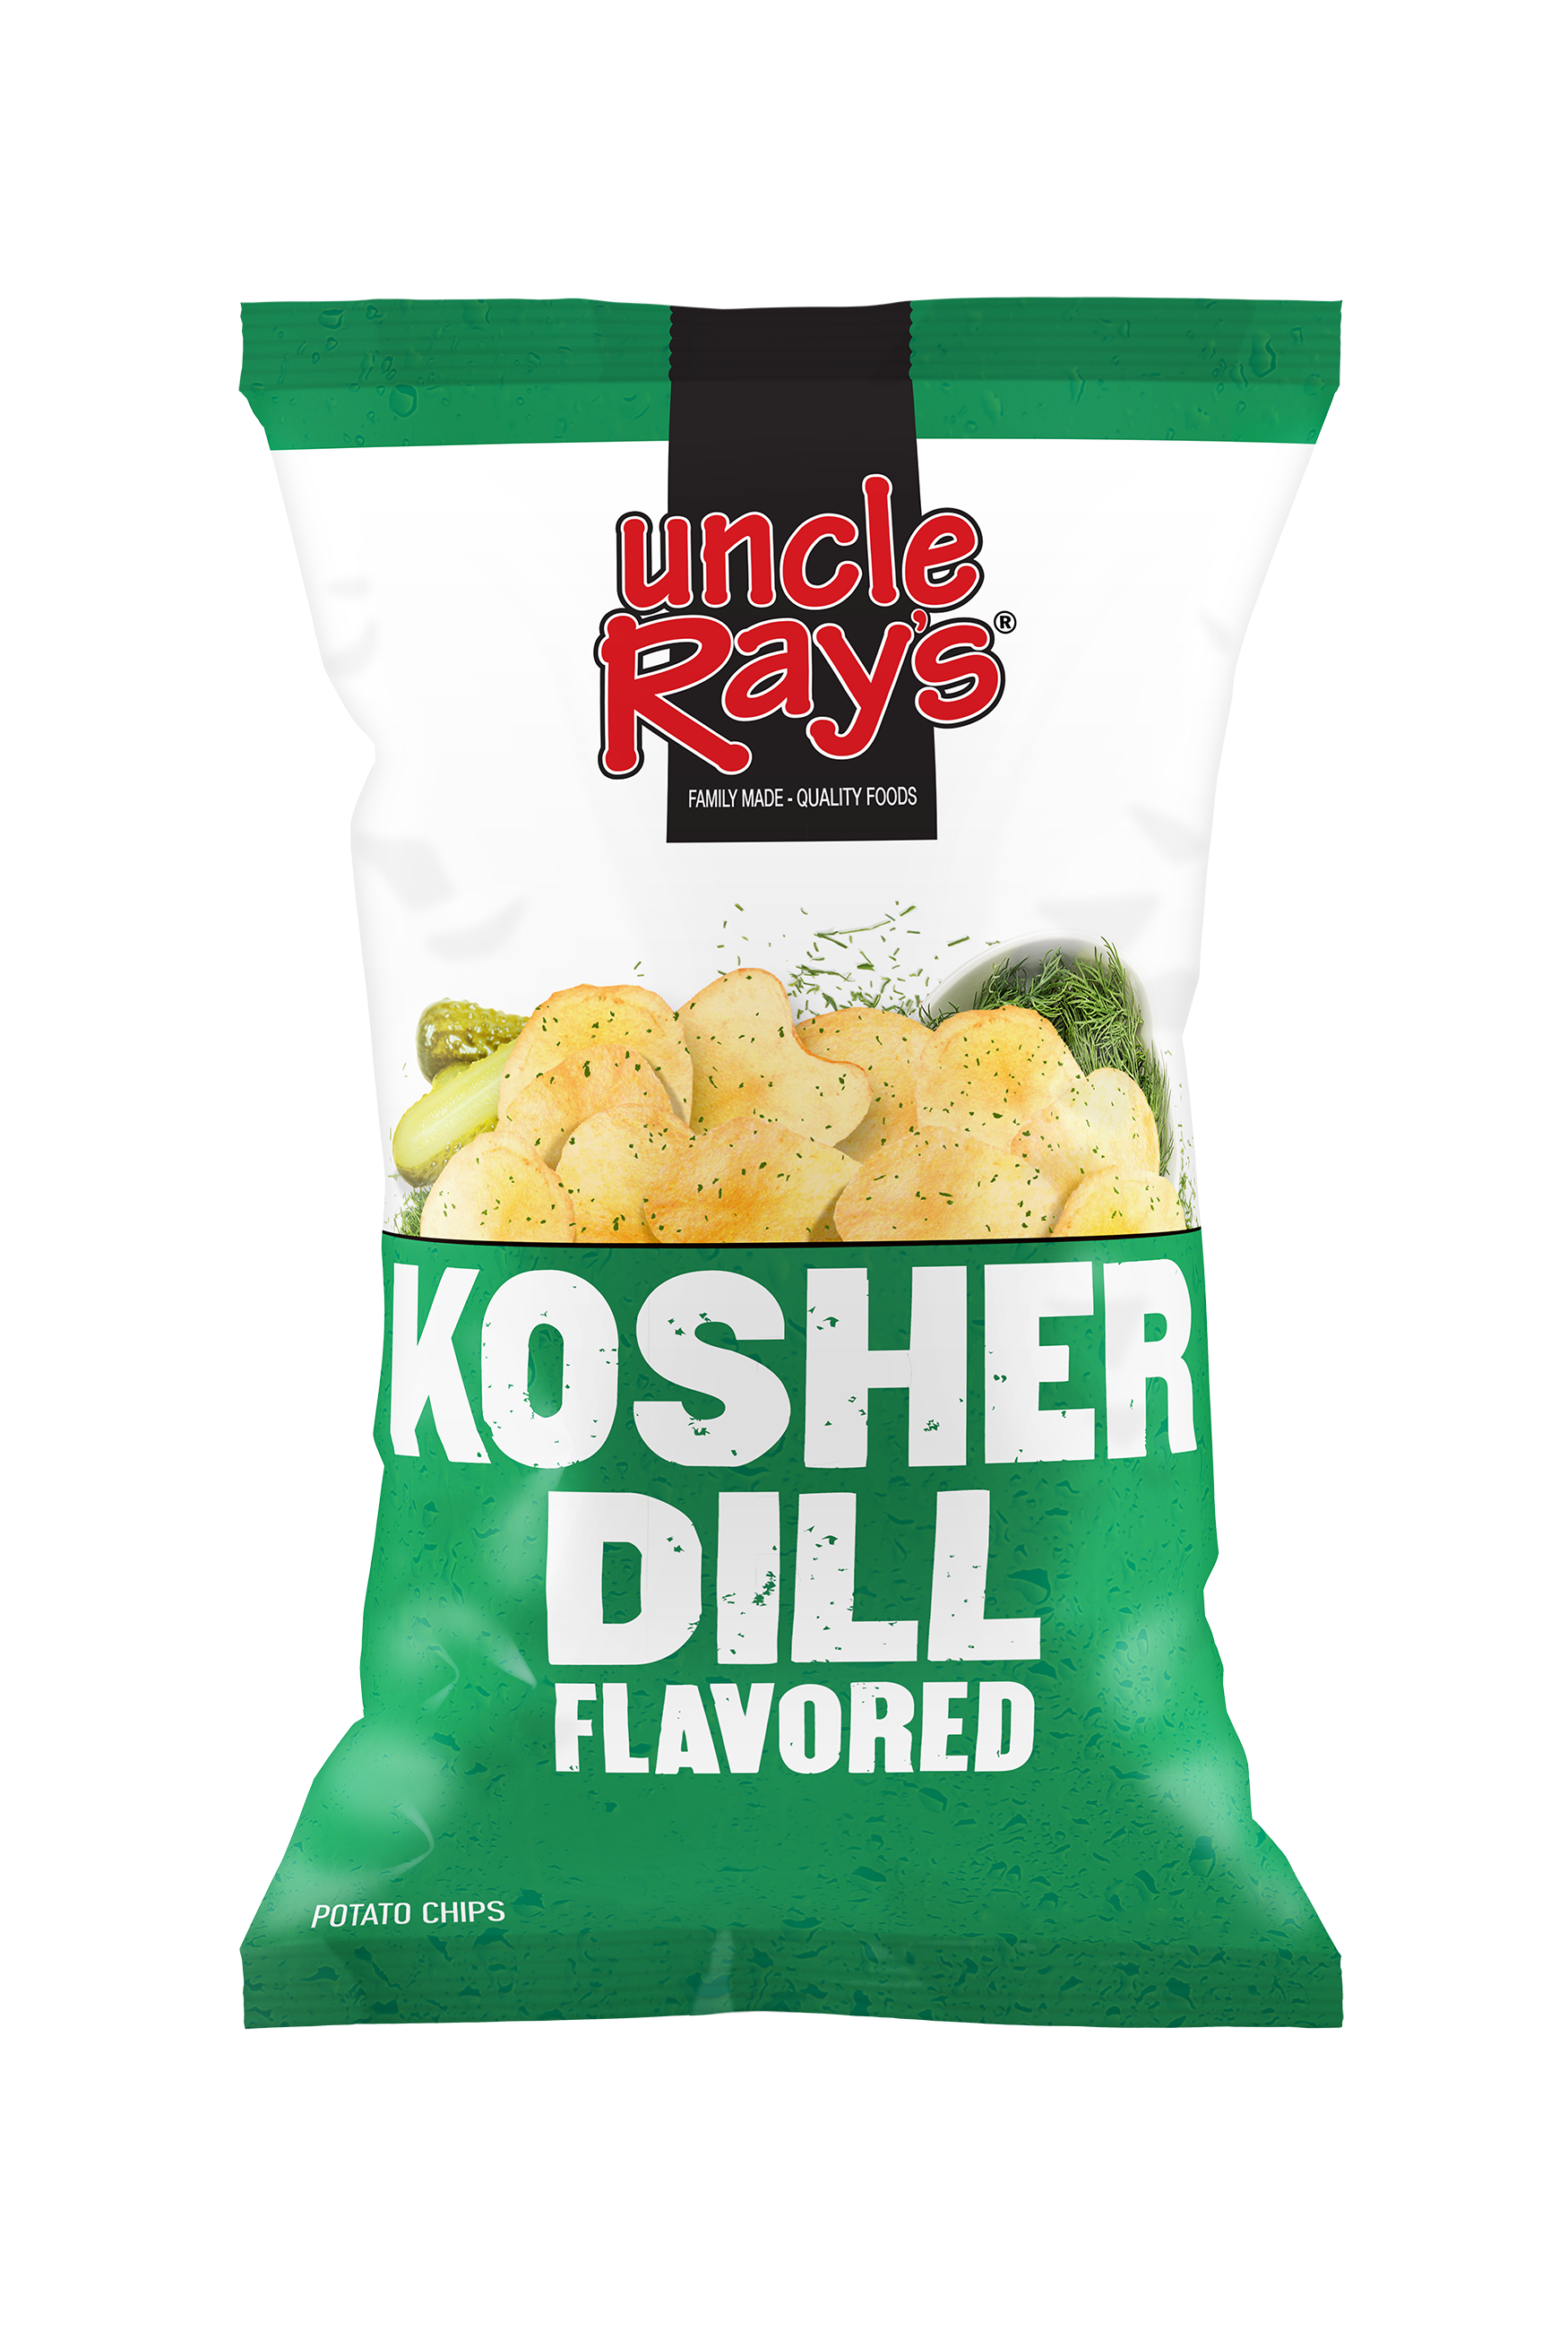 Uncle rays kosher dill chips 3oz